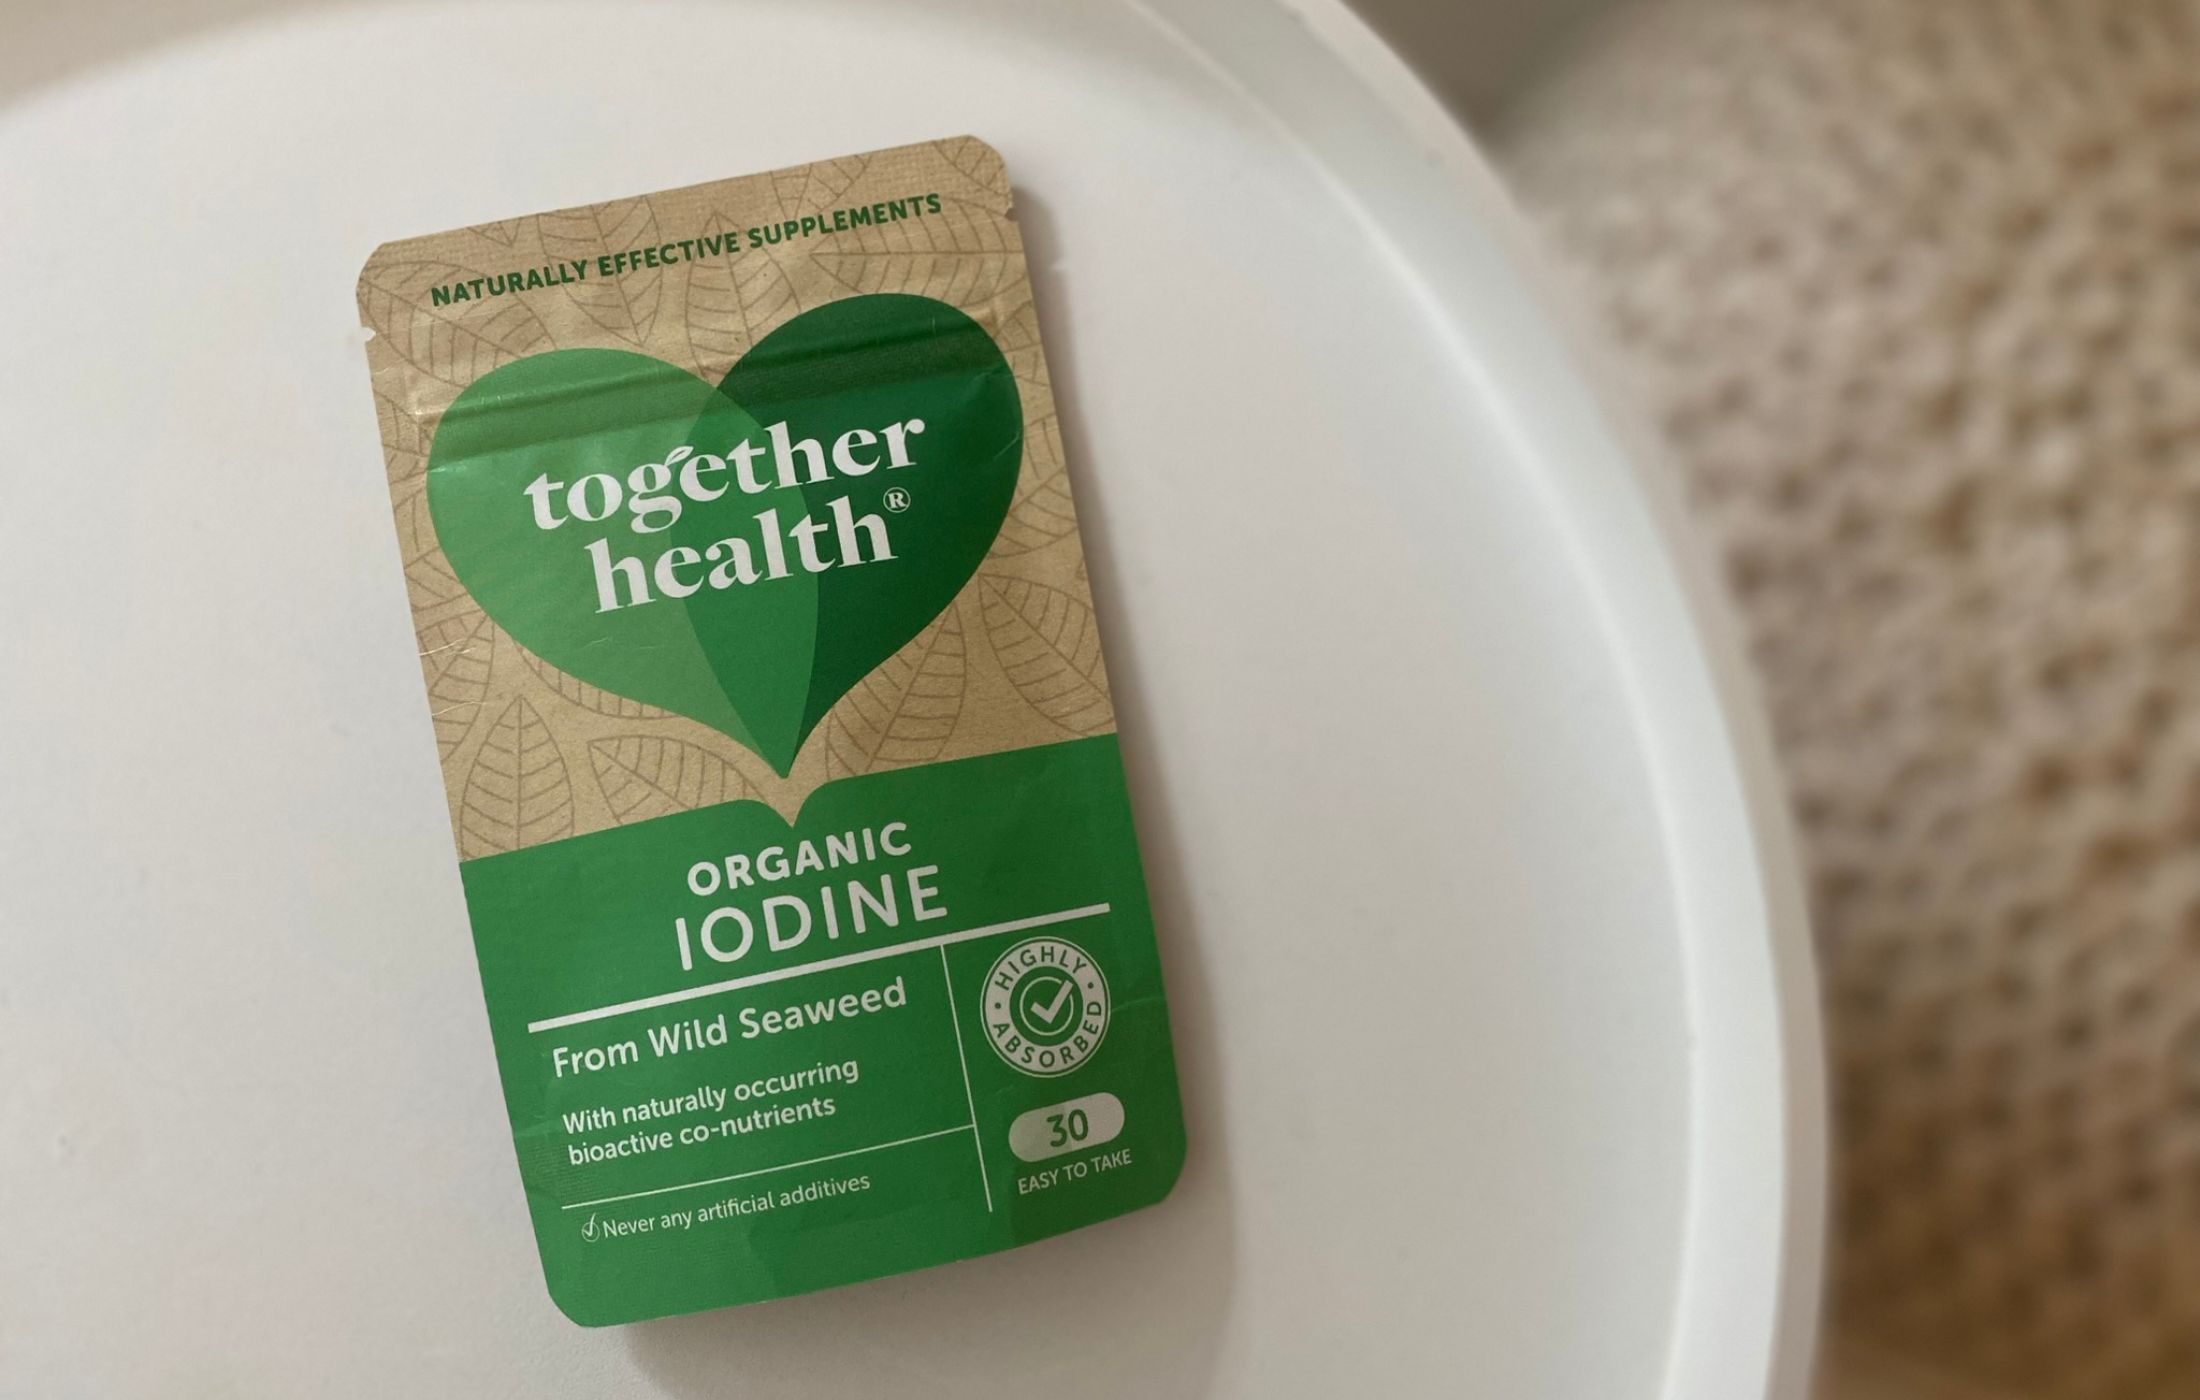 A pouch of vegan organic iodine supplements from Together Health